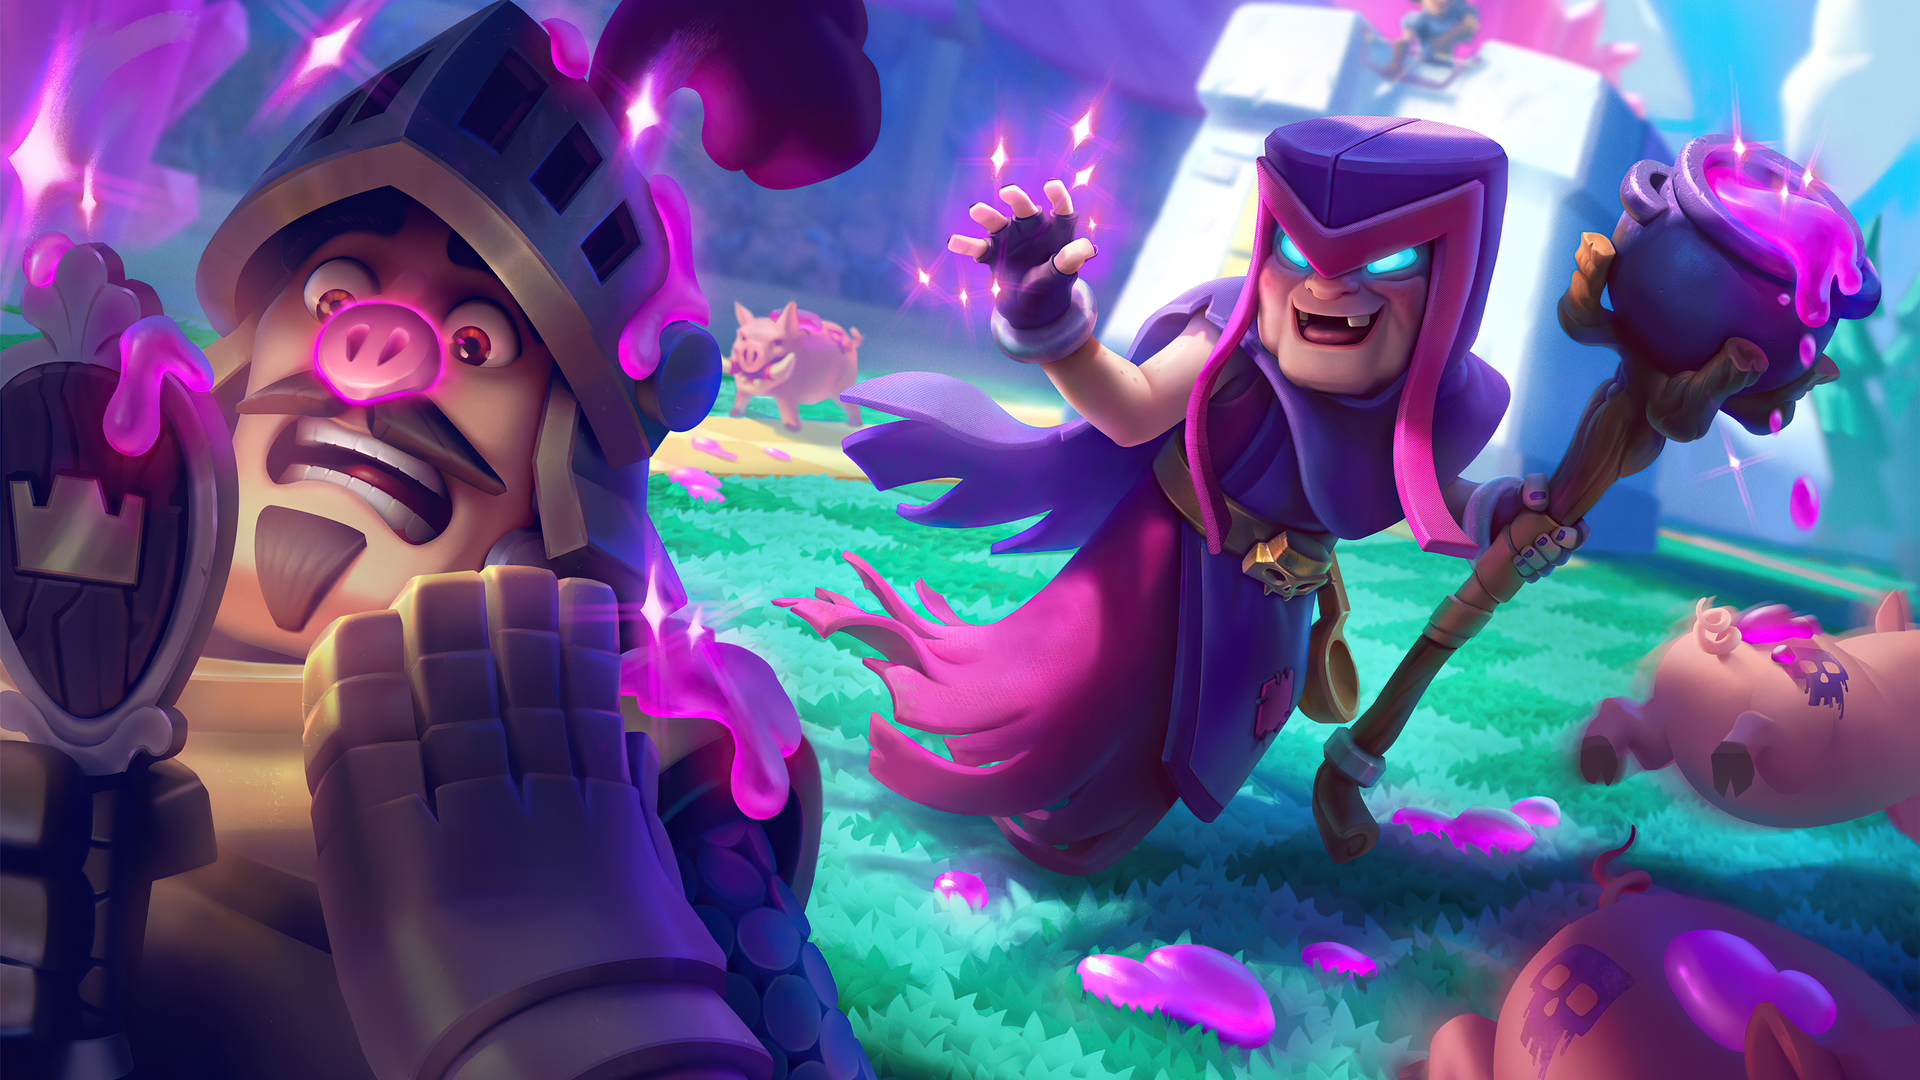 Motherwitch Clash Royale 4k In 1920x1080 Resolution. motherwitch-clash-roya...